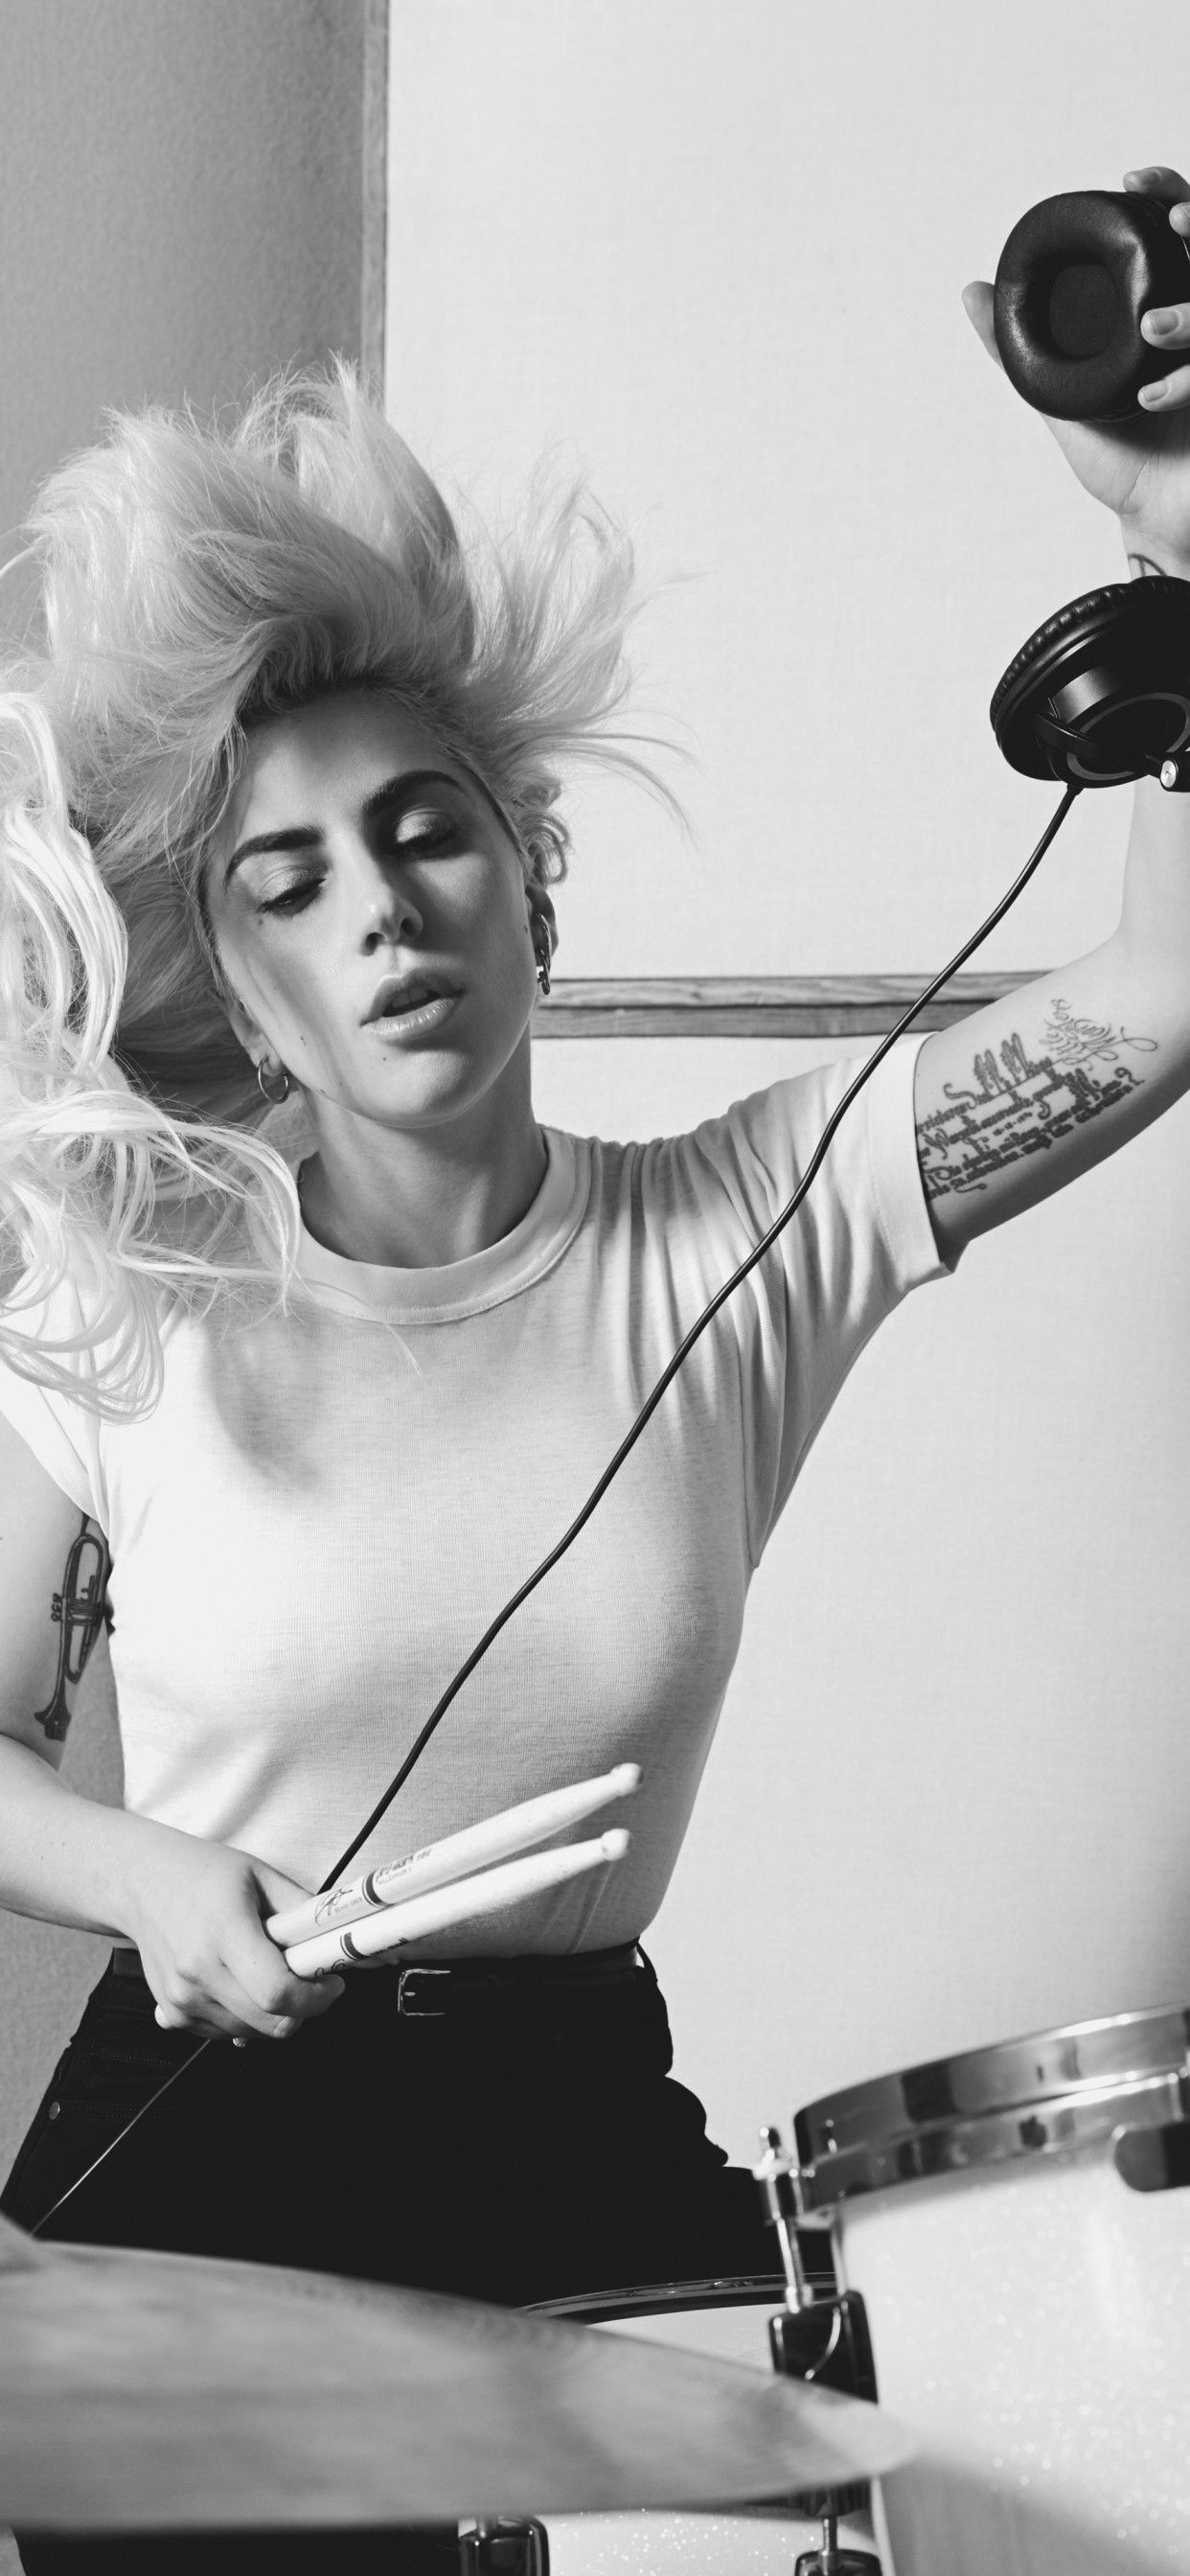 Drums: Lady Gaga, American Singer, Songwriter, And Actress, Drumming. 1250x2690 HD Wallpaper.